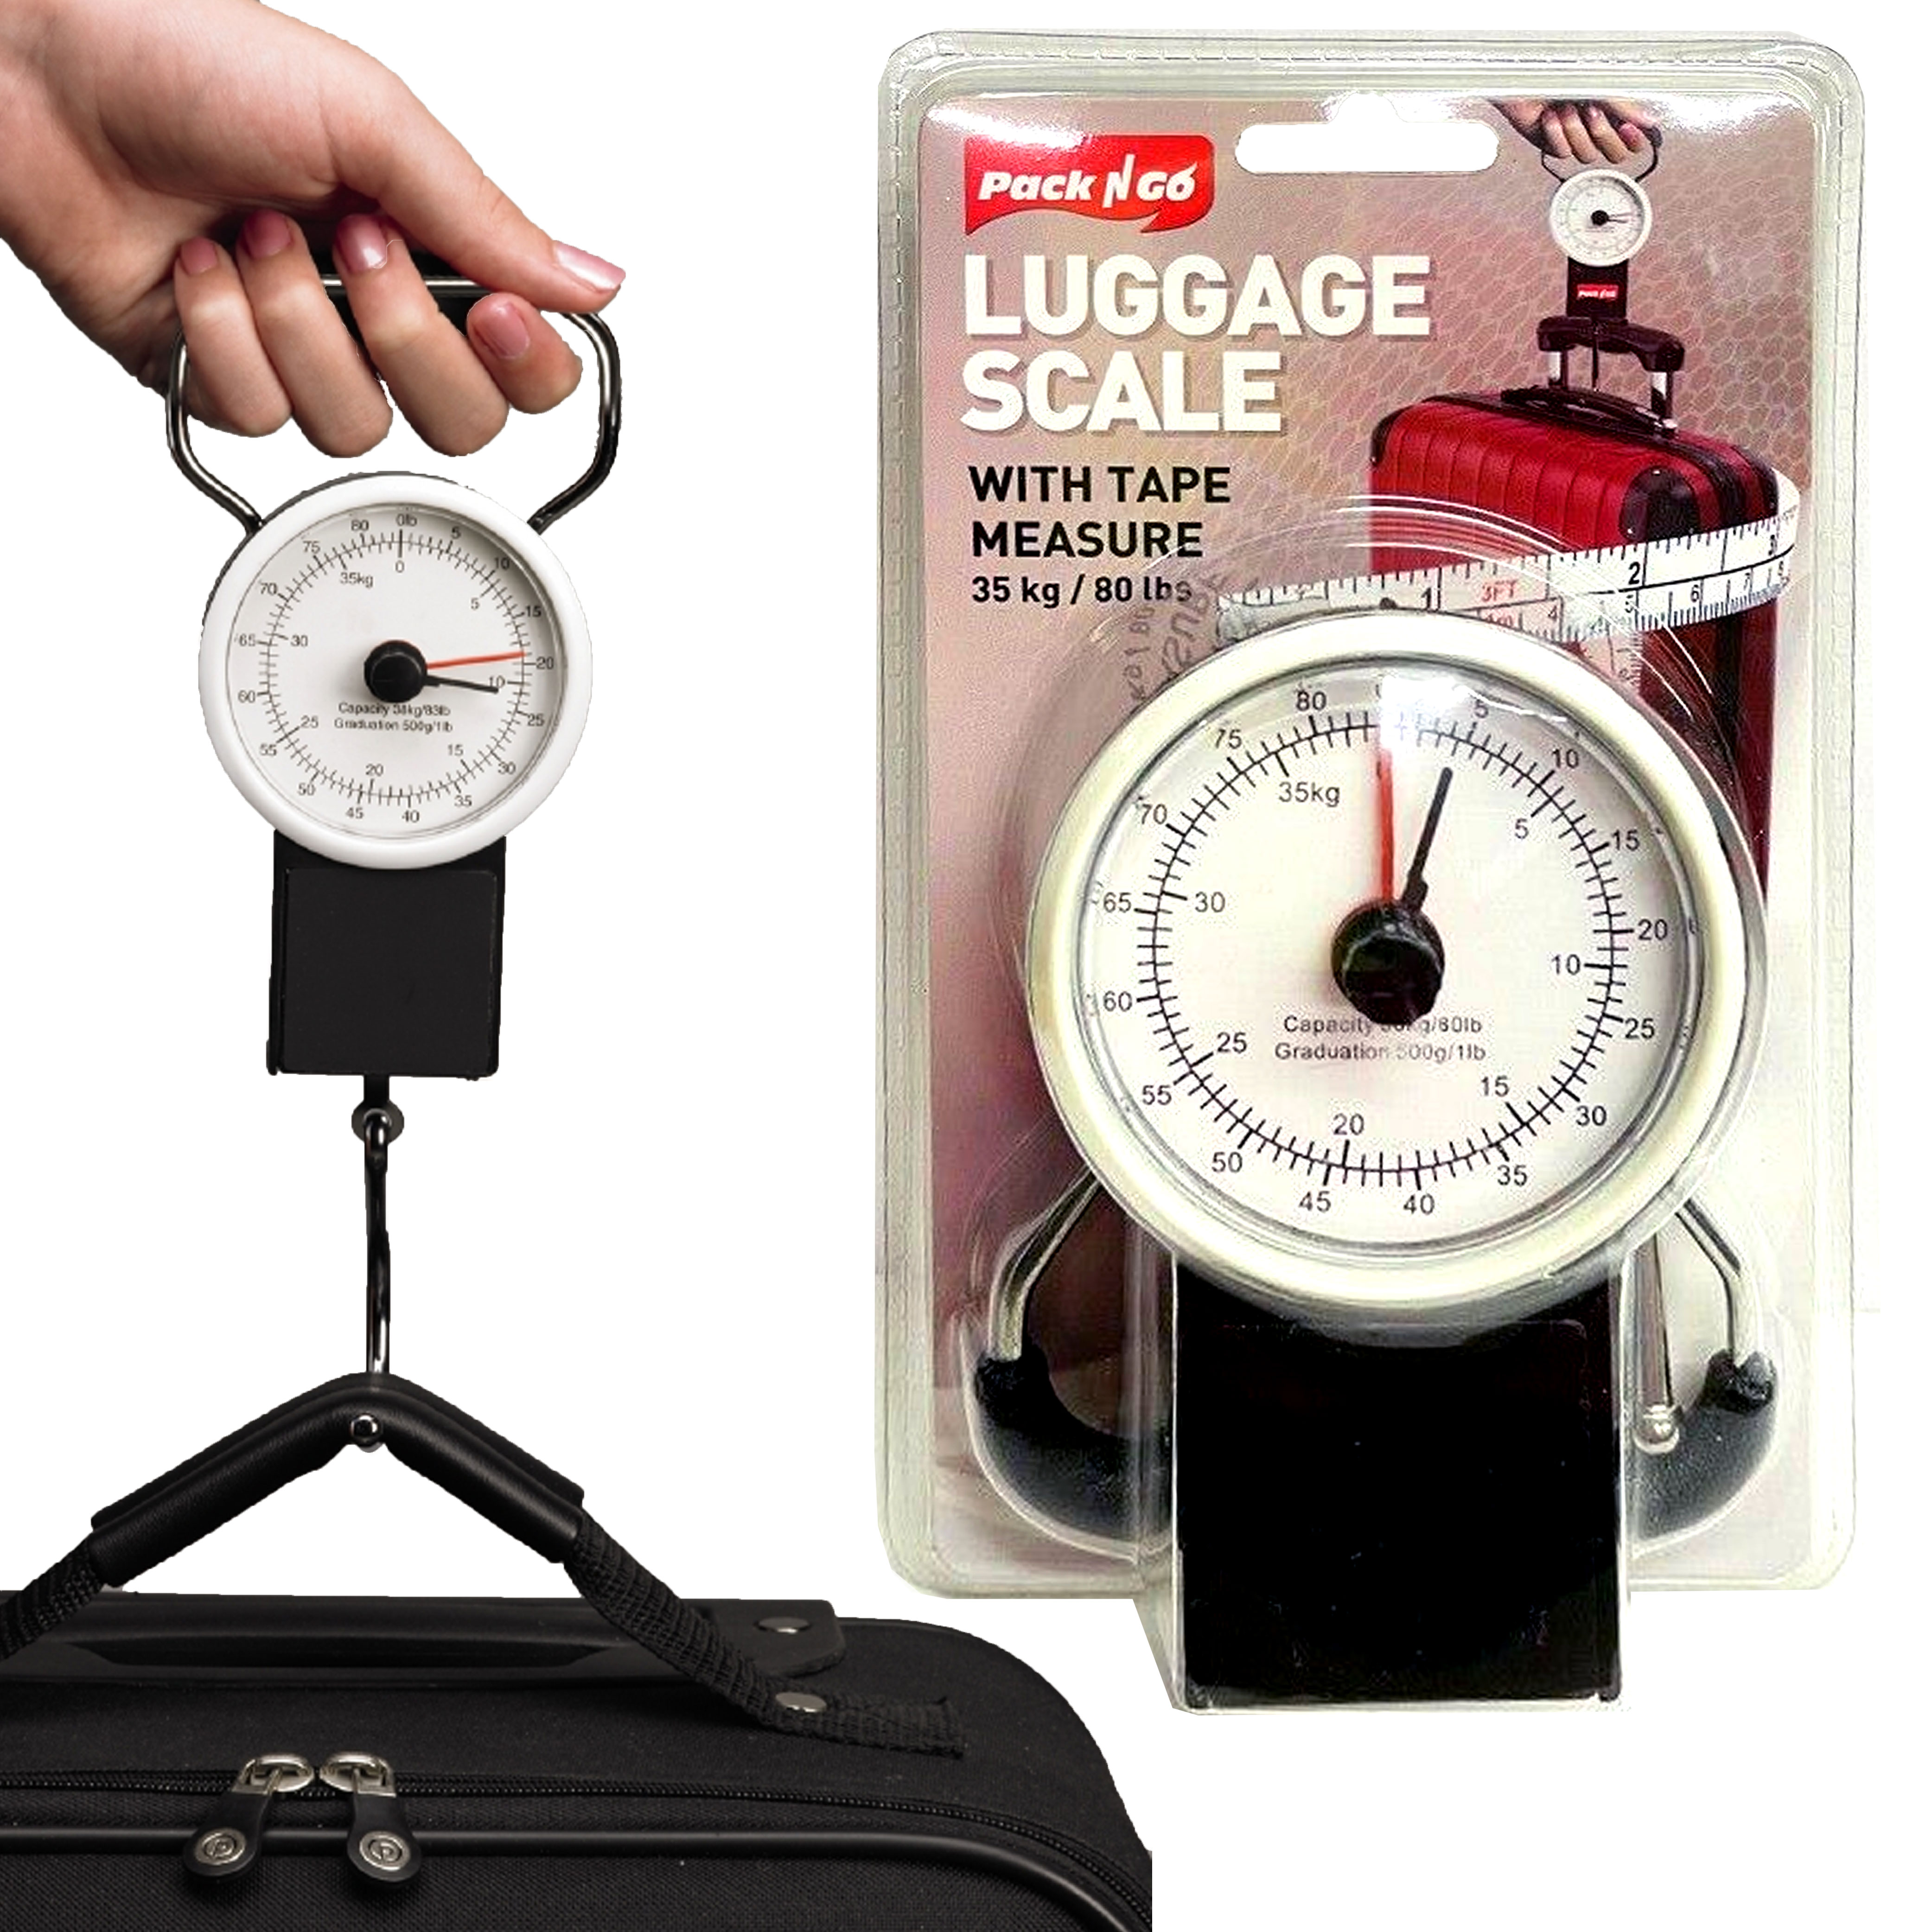 Samsonite Smart Luggage: Weight Scales for Hassle-Free Travel